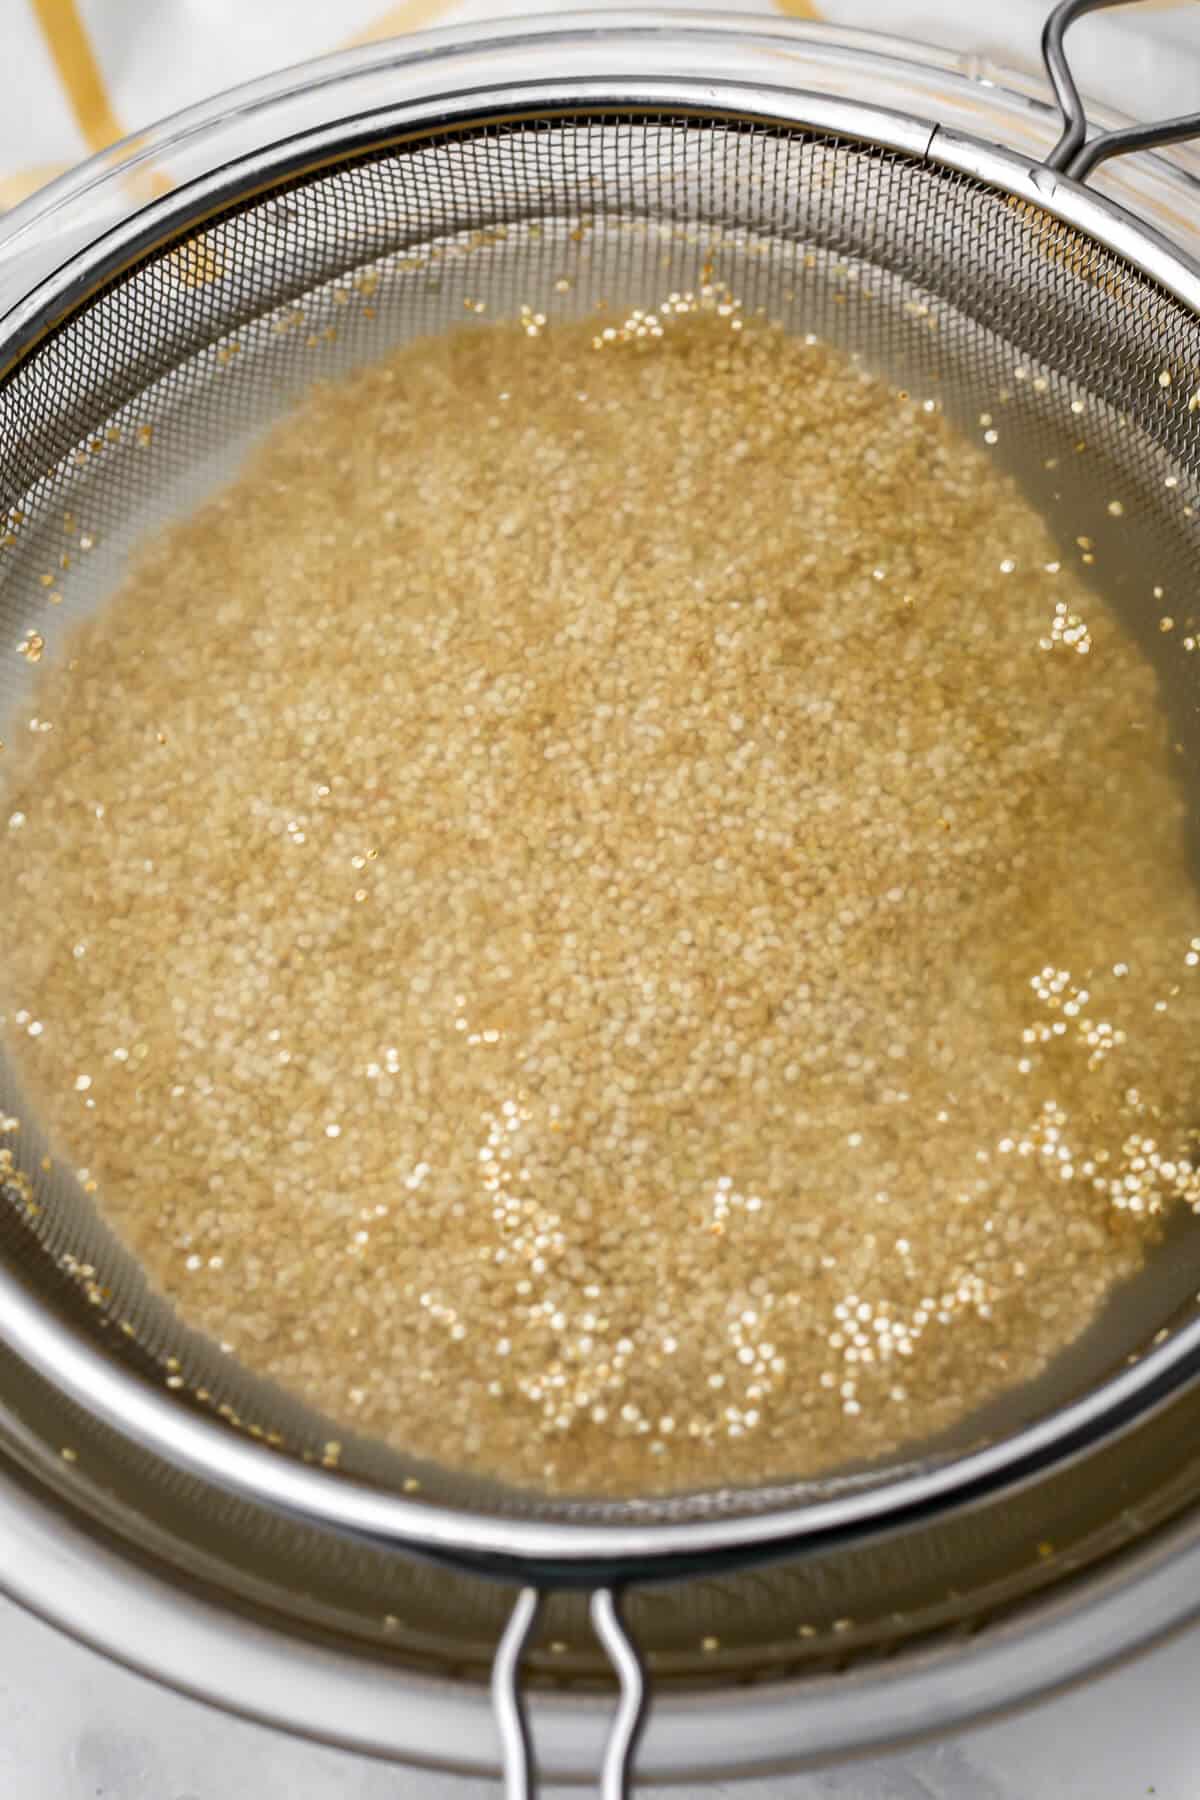 Soaking uncooked quinoa in a bowl of cold water before rinsing.